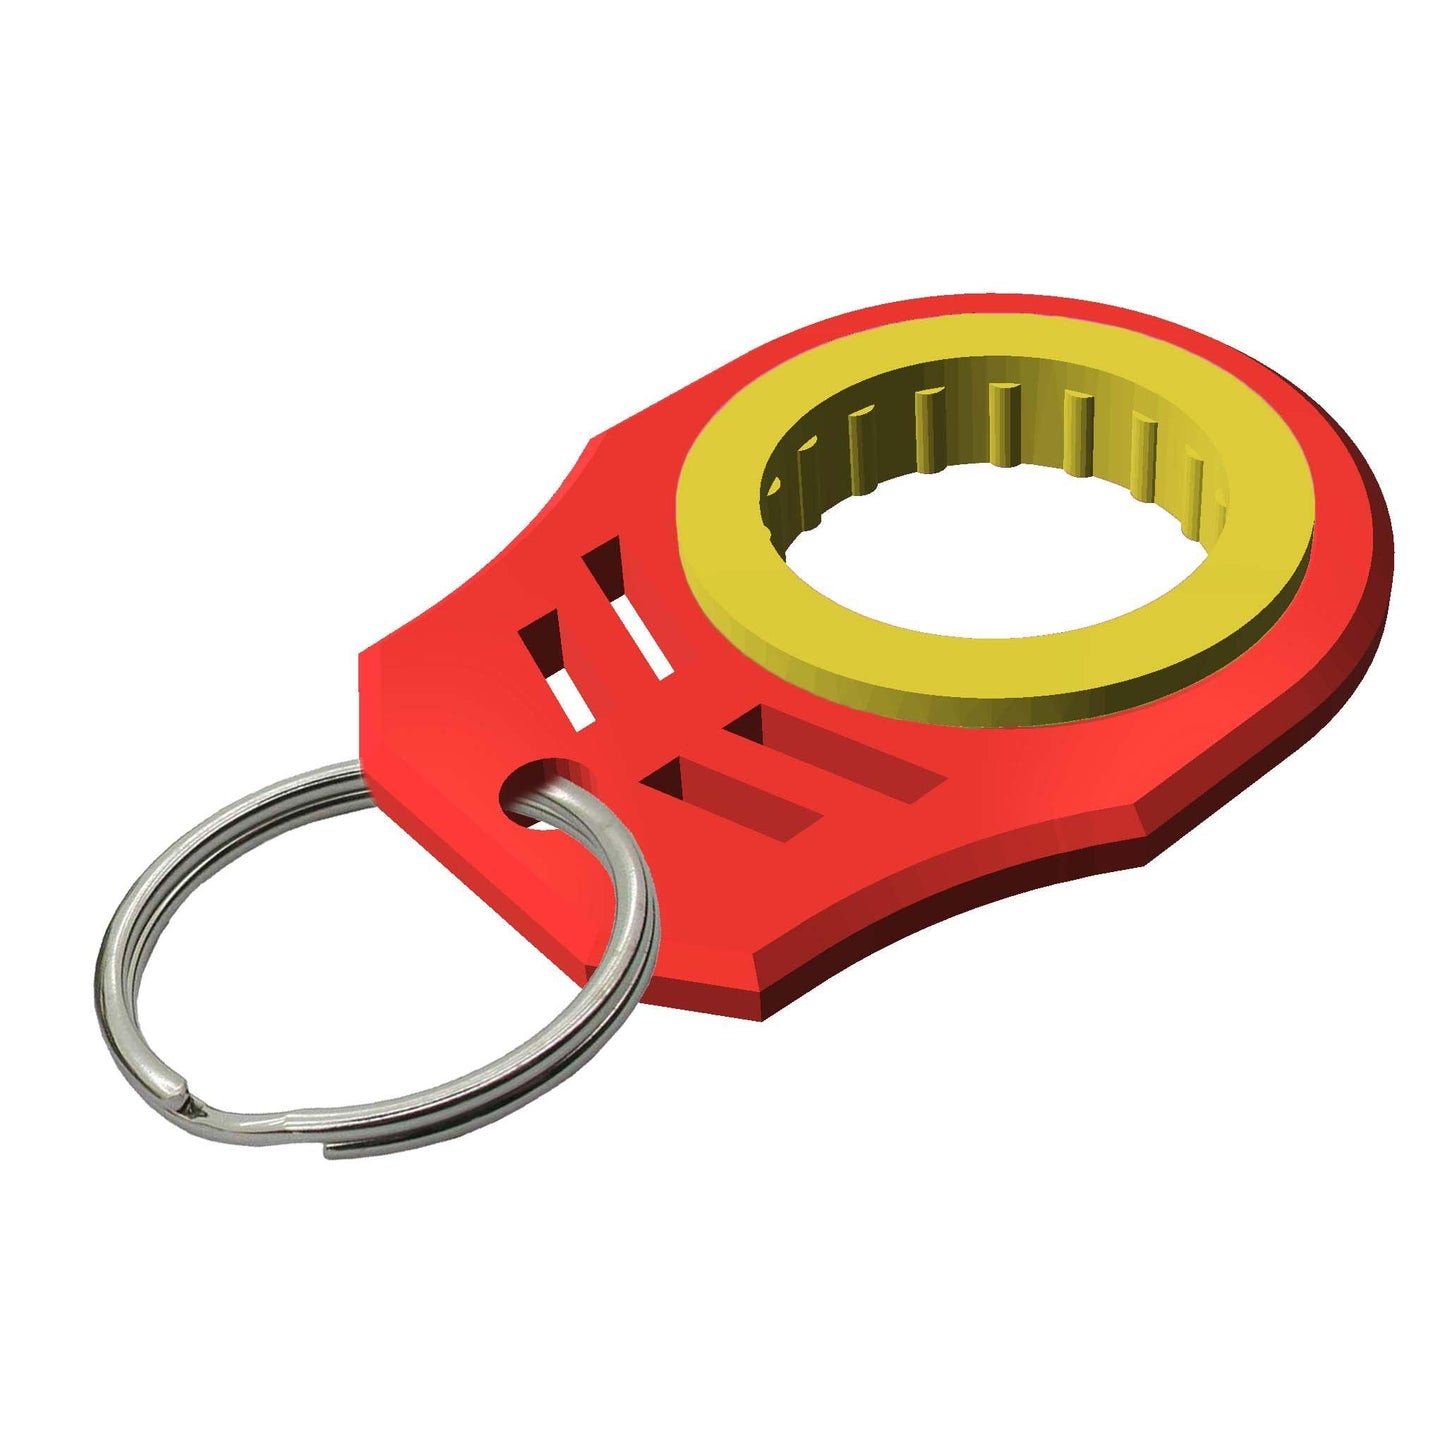 Keychain Spinner Toy with Chain Attachment